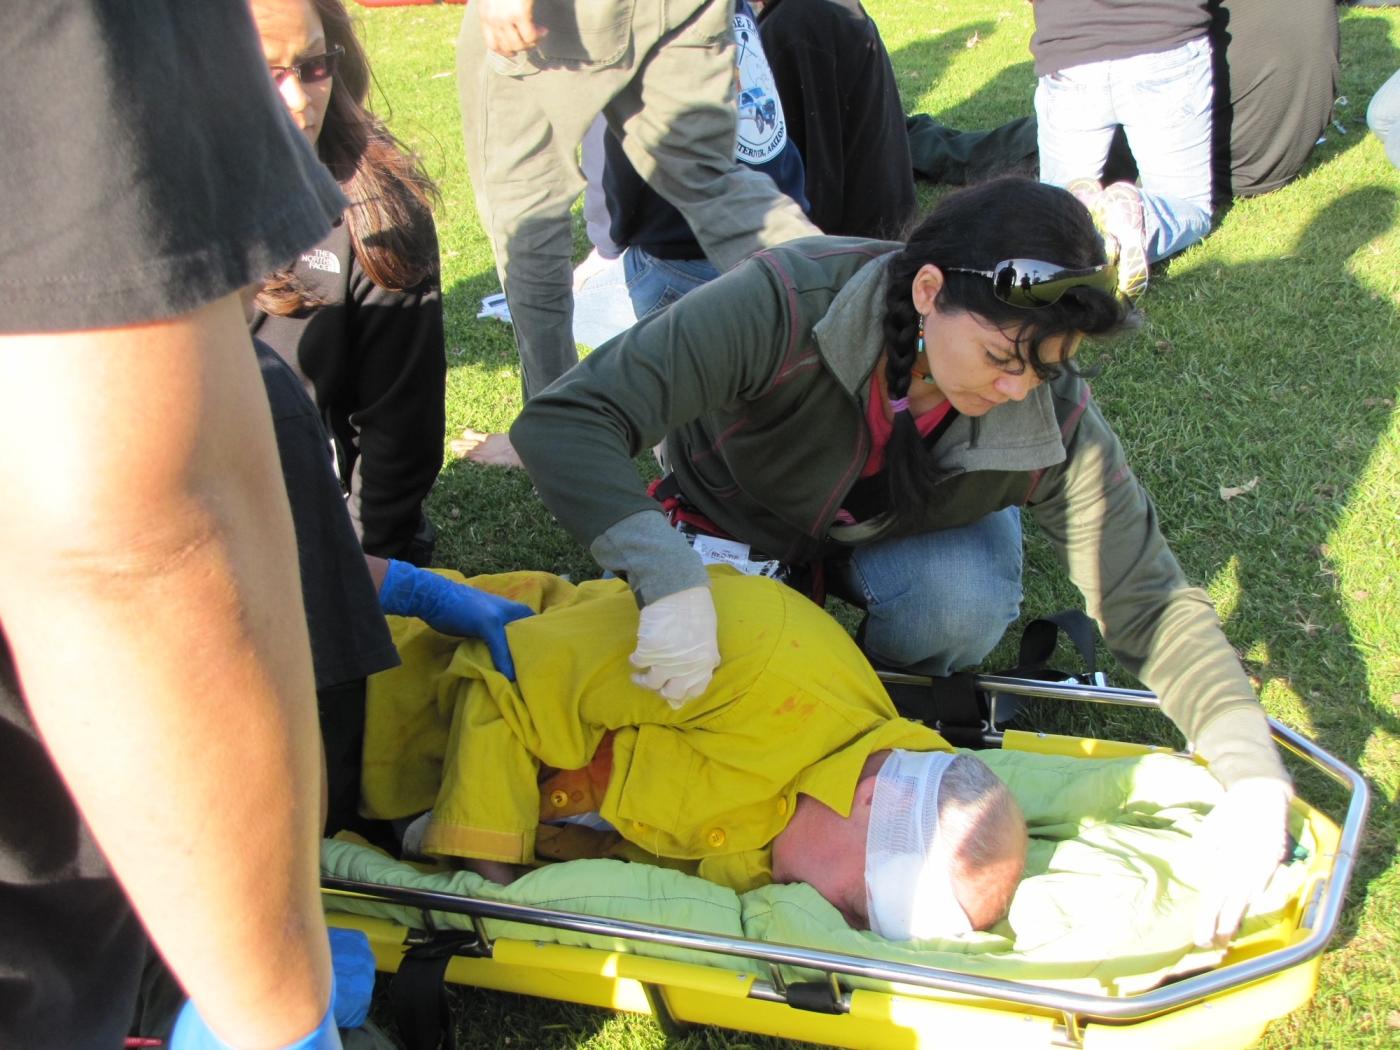 A BIA Wildland Fire First Aid Program trainee checks on a patient during a scenario-based exercise.